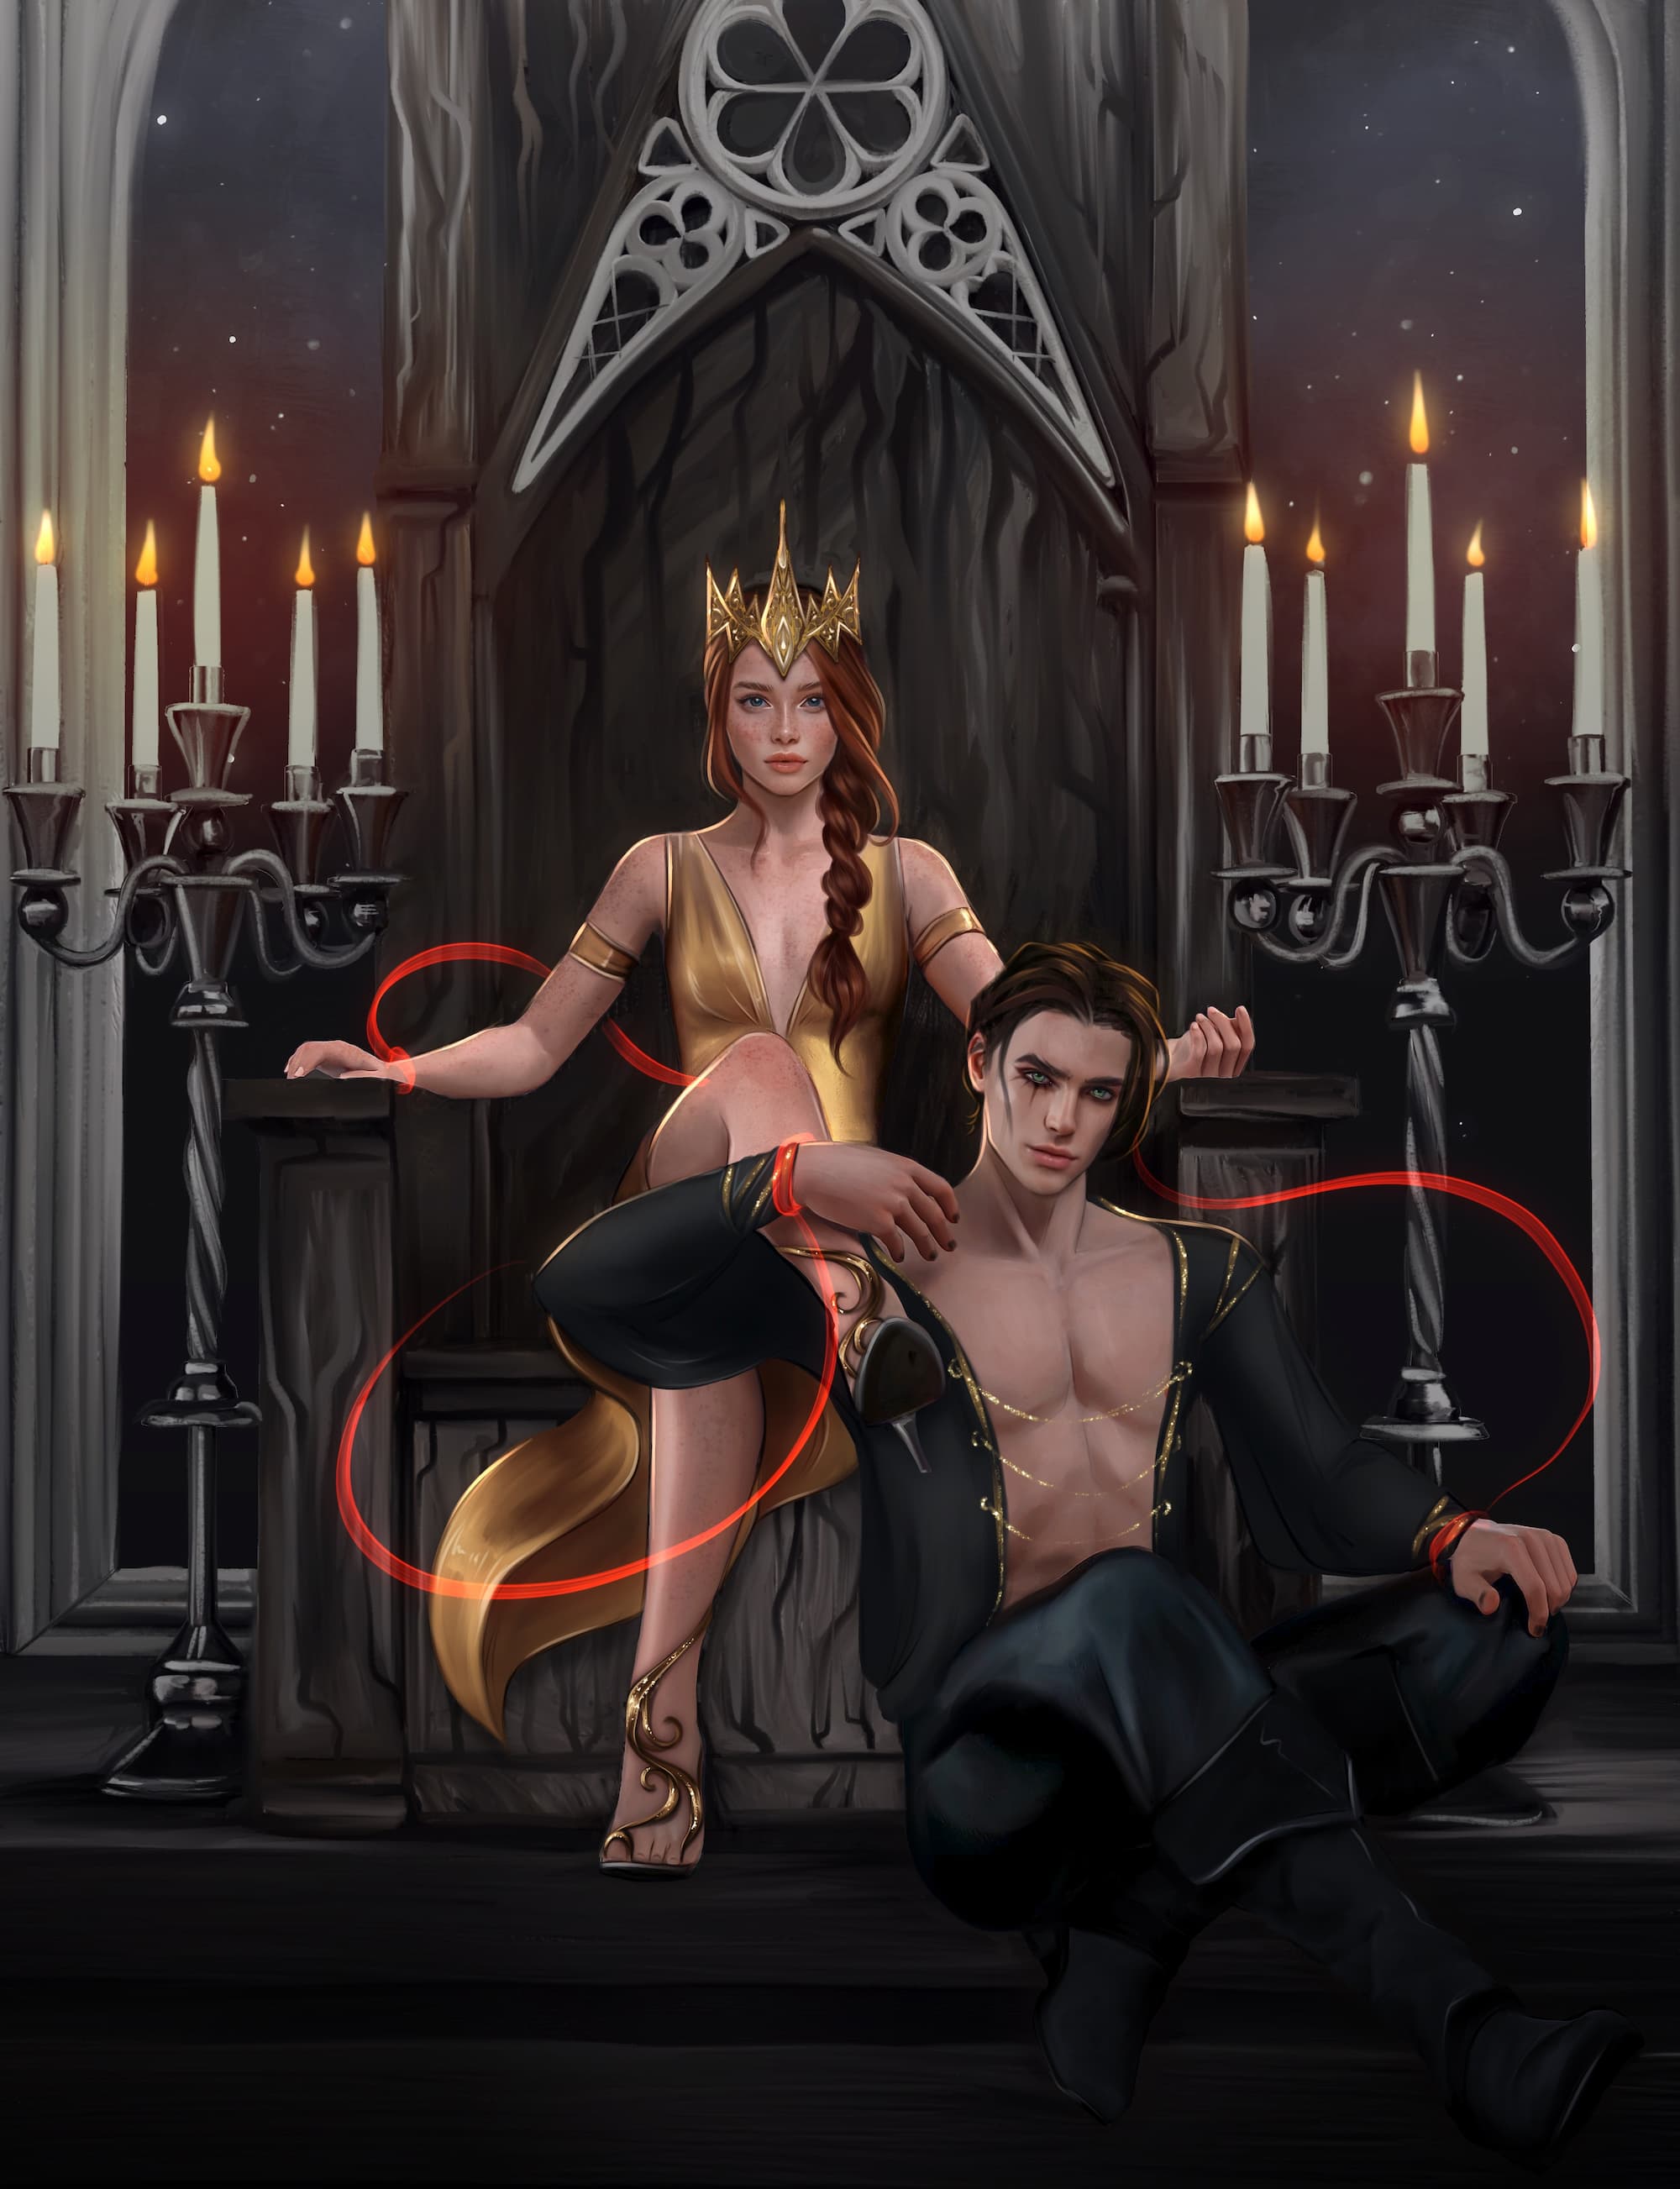 A hot couple on throne with red ribbon